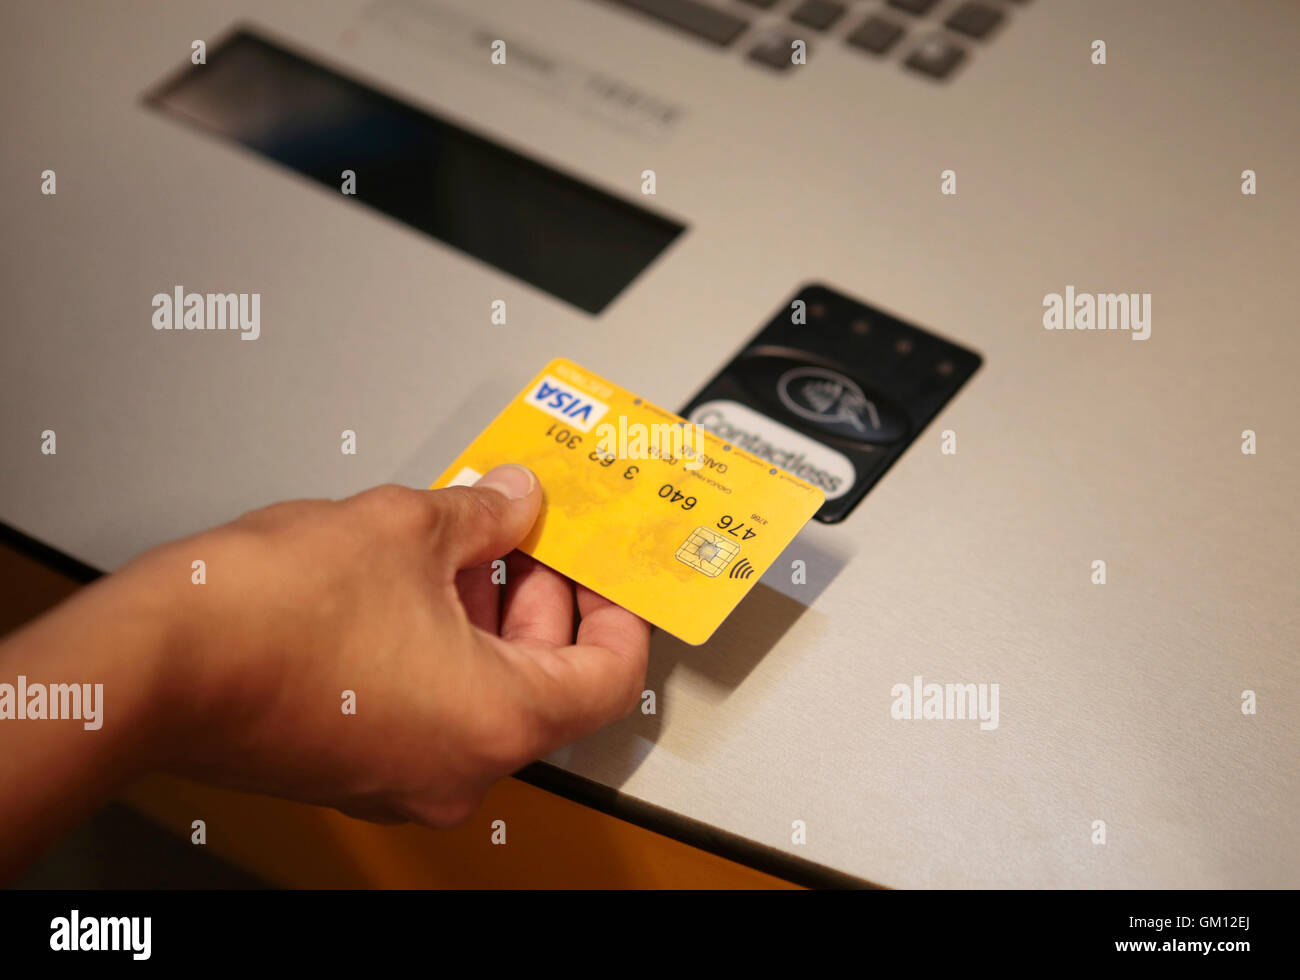 Using a credit card on a contactless payment system Stock Photo